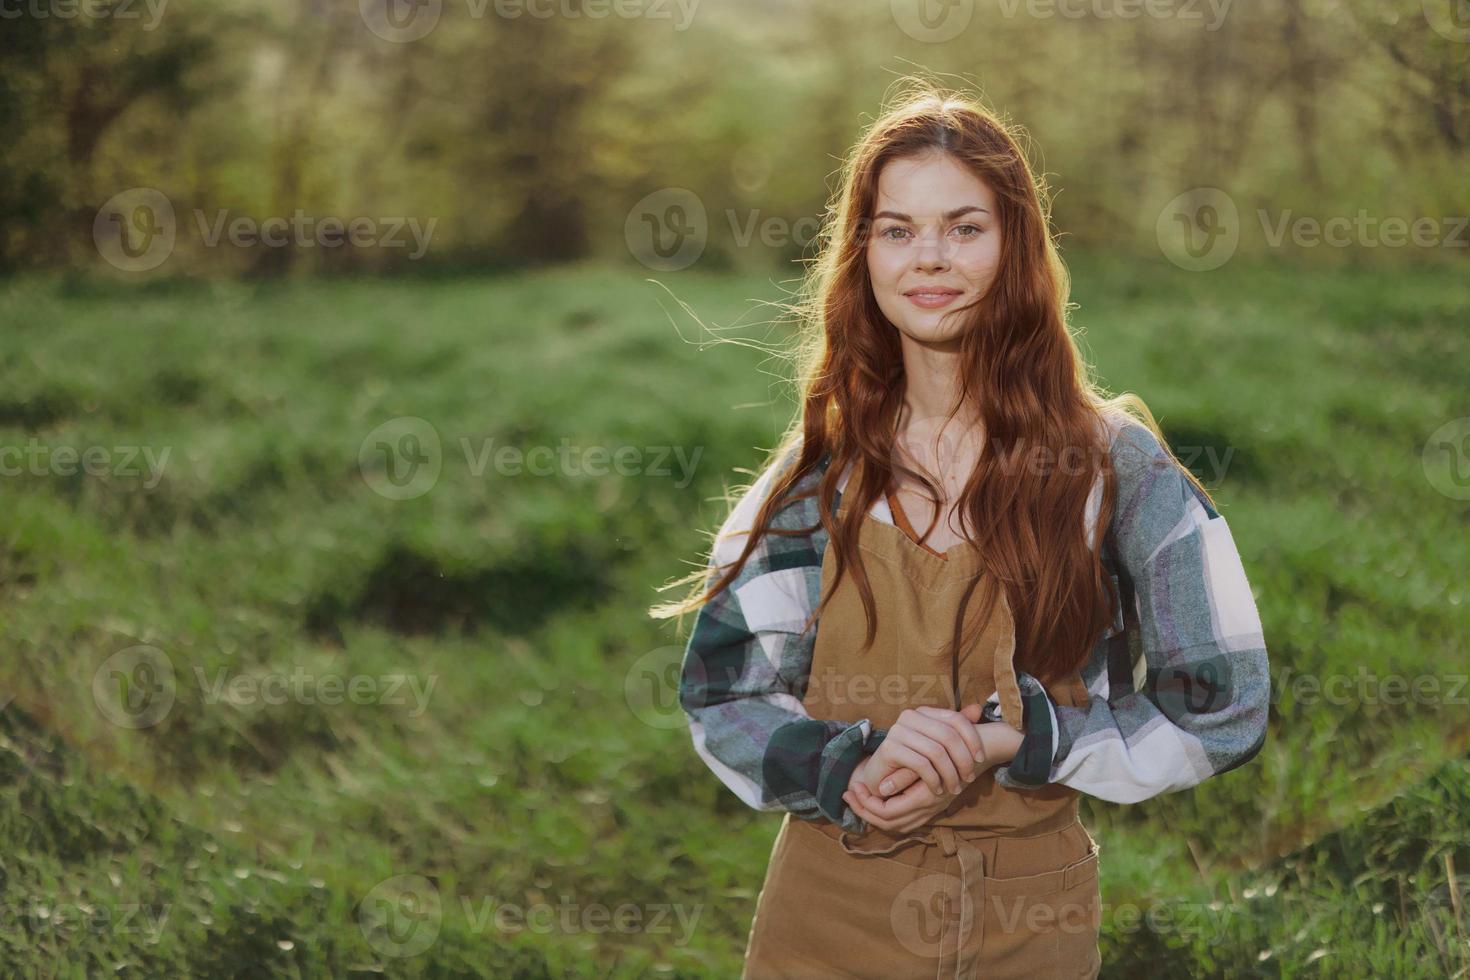 A woman gardener in an apron stands in a field of green grass outdoors, smiling on a summer afternoon into a sunny sunset after a day's work photo